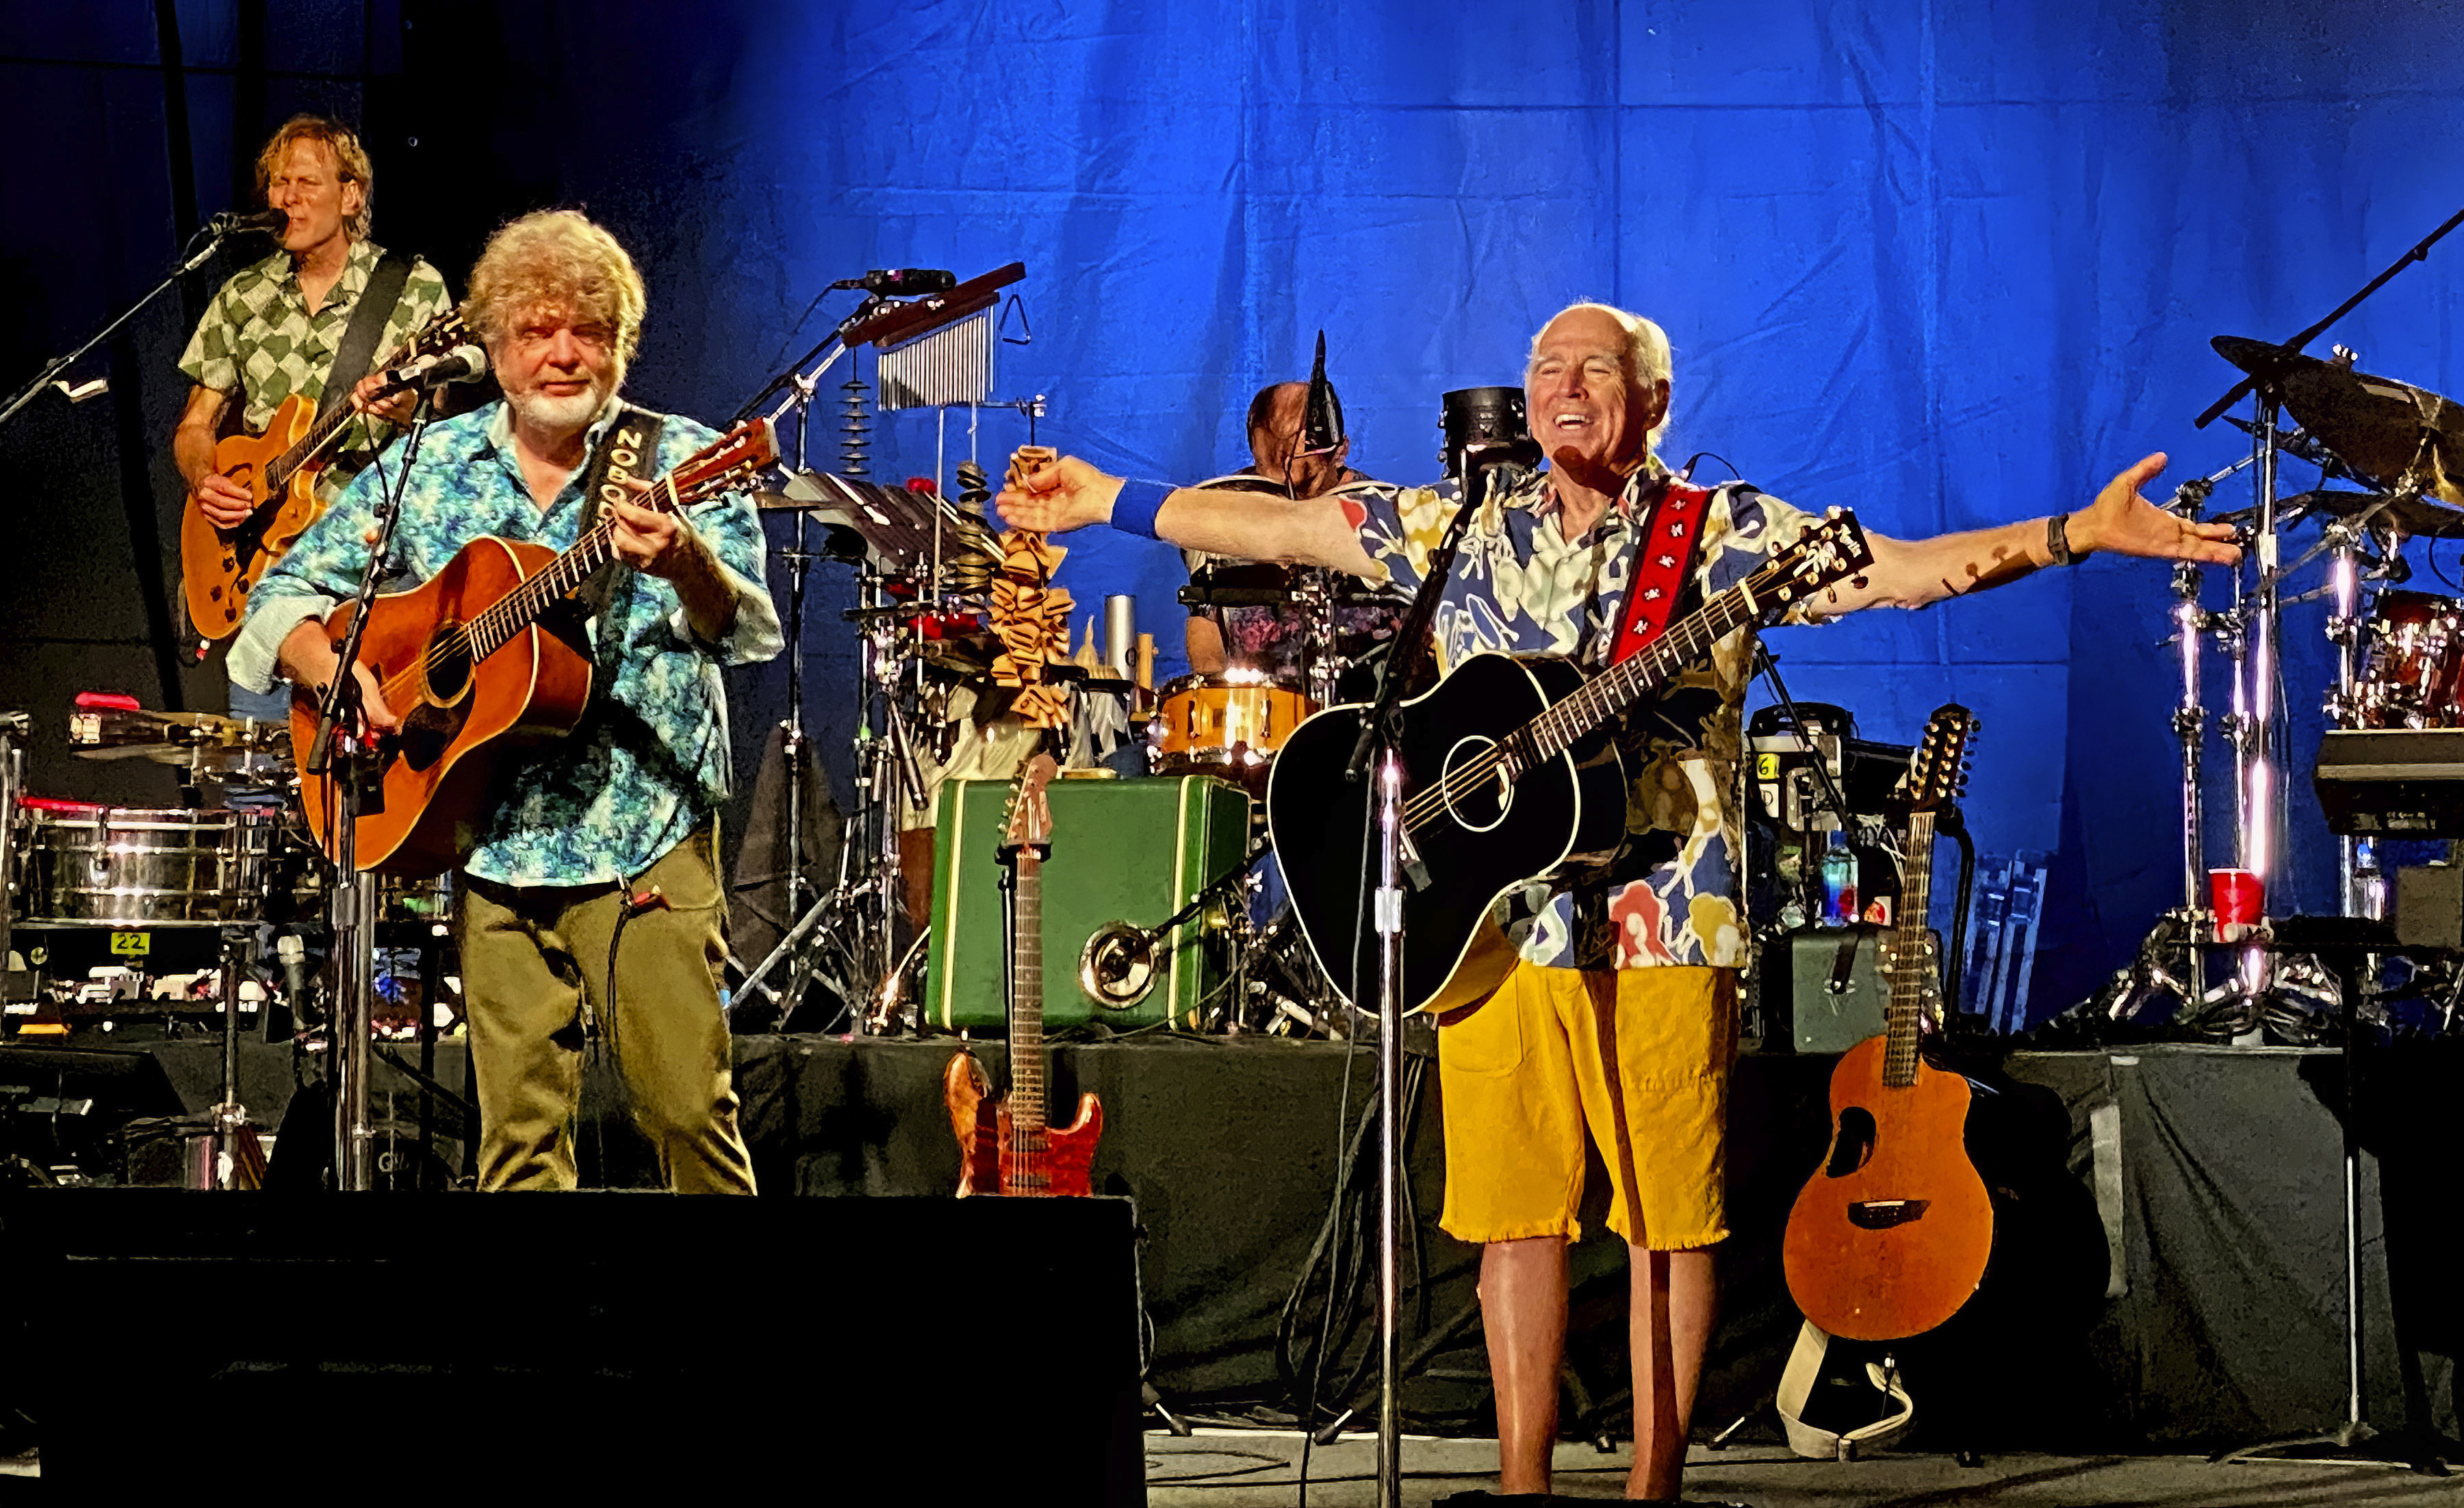 Singer-songwriter Jimmy Buffett, right, along with members of his Coral Reefer Band including Mac McAnally, center, perform during a concert in Key West, Florida  on Thursday, Feb. 9, 2023